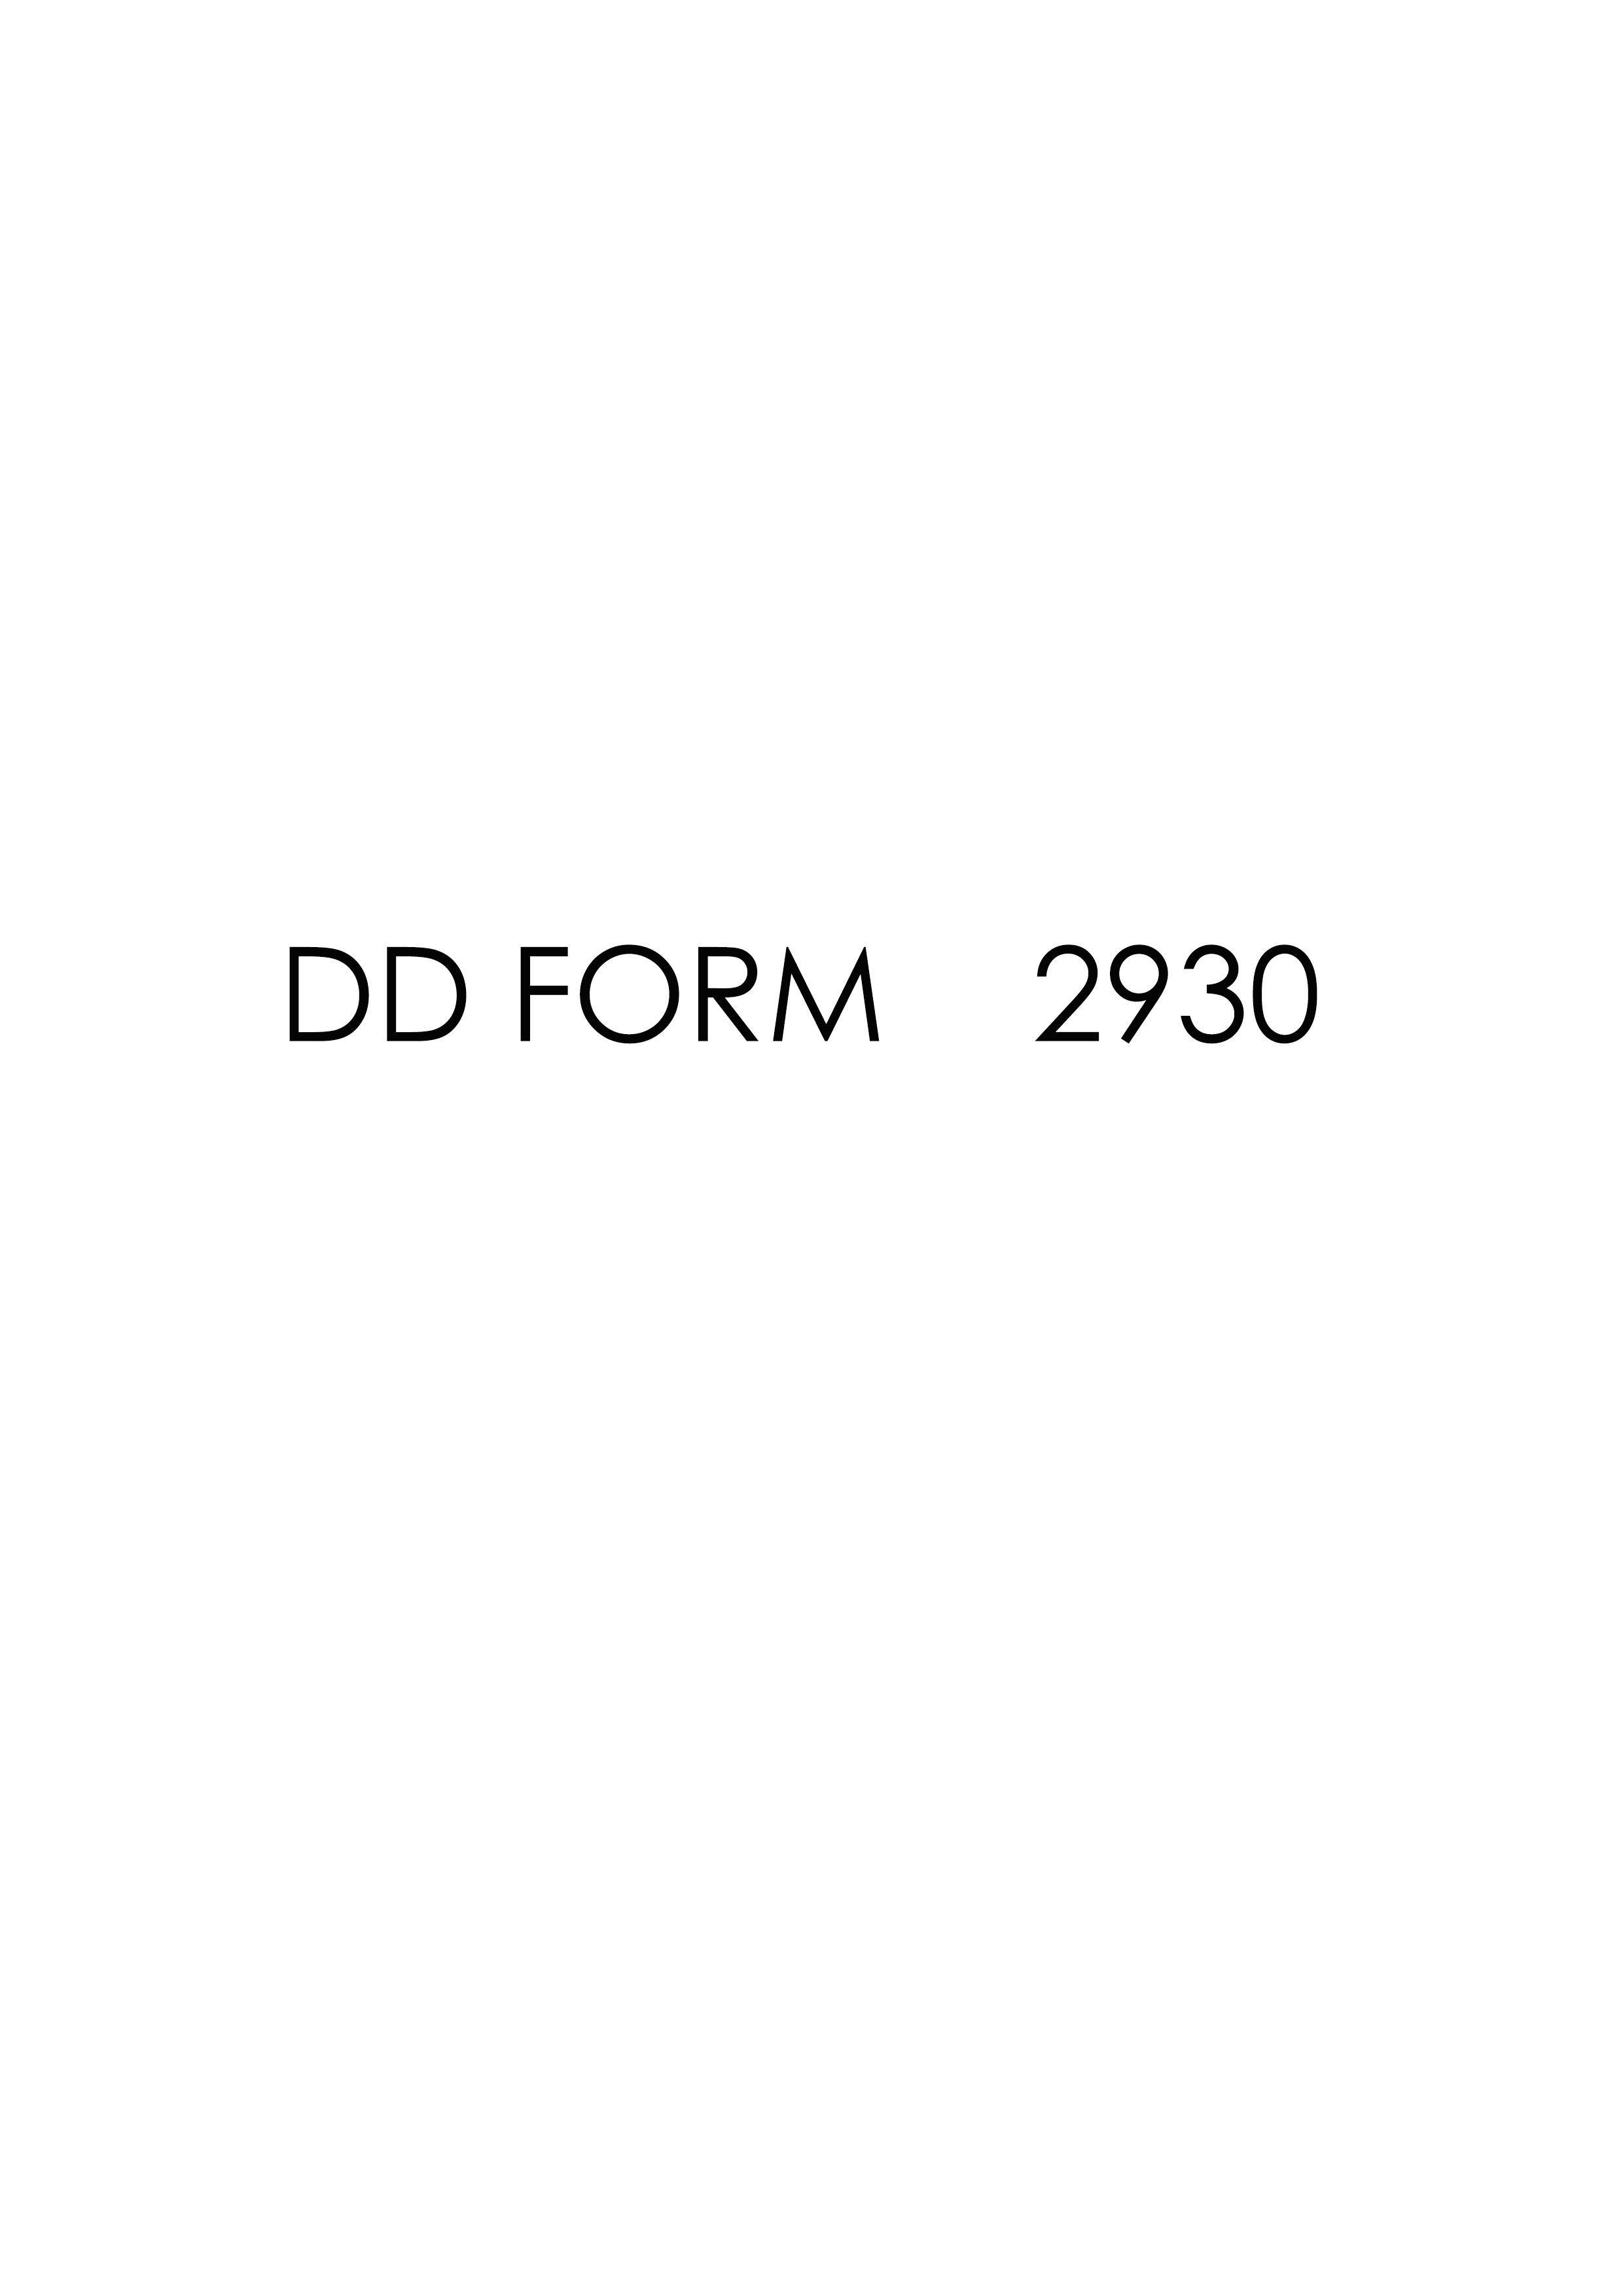 Download Fillable dd Form 2930